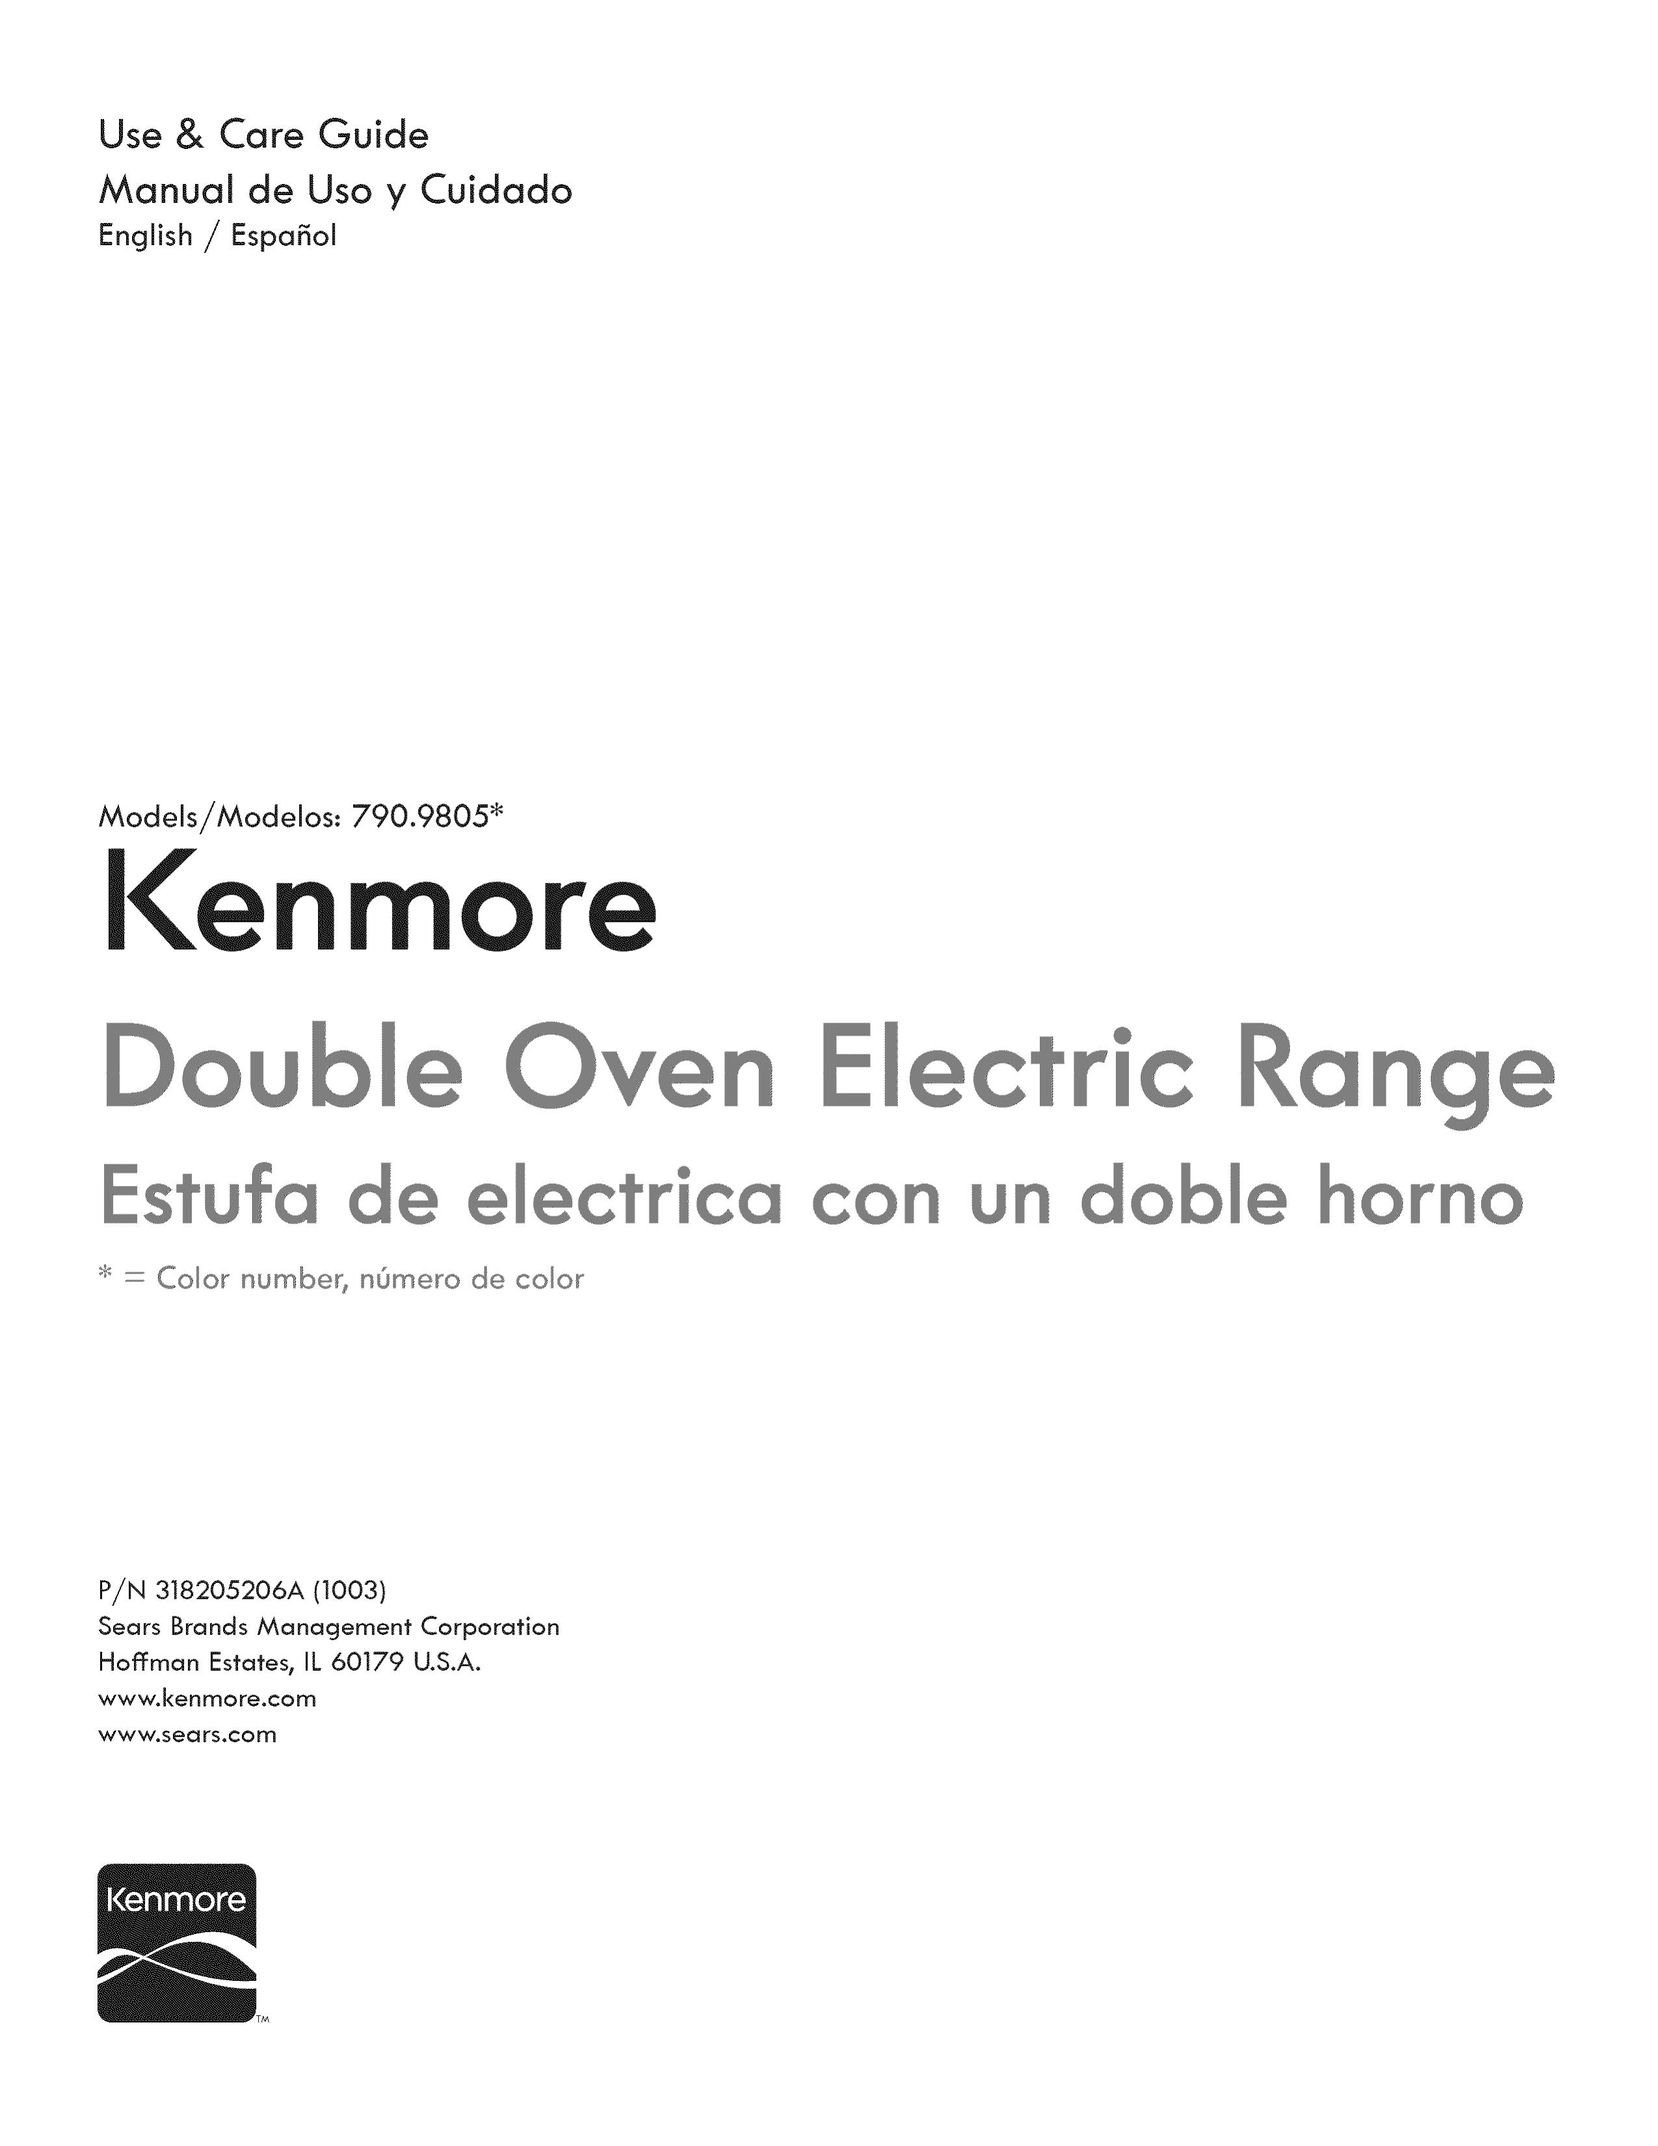 Kenmore 790.9805 Double Oven User Manual